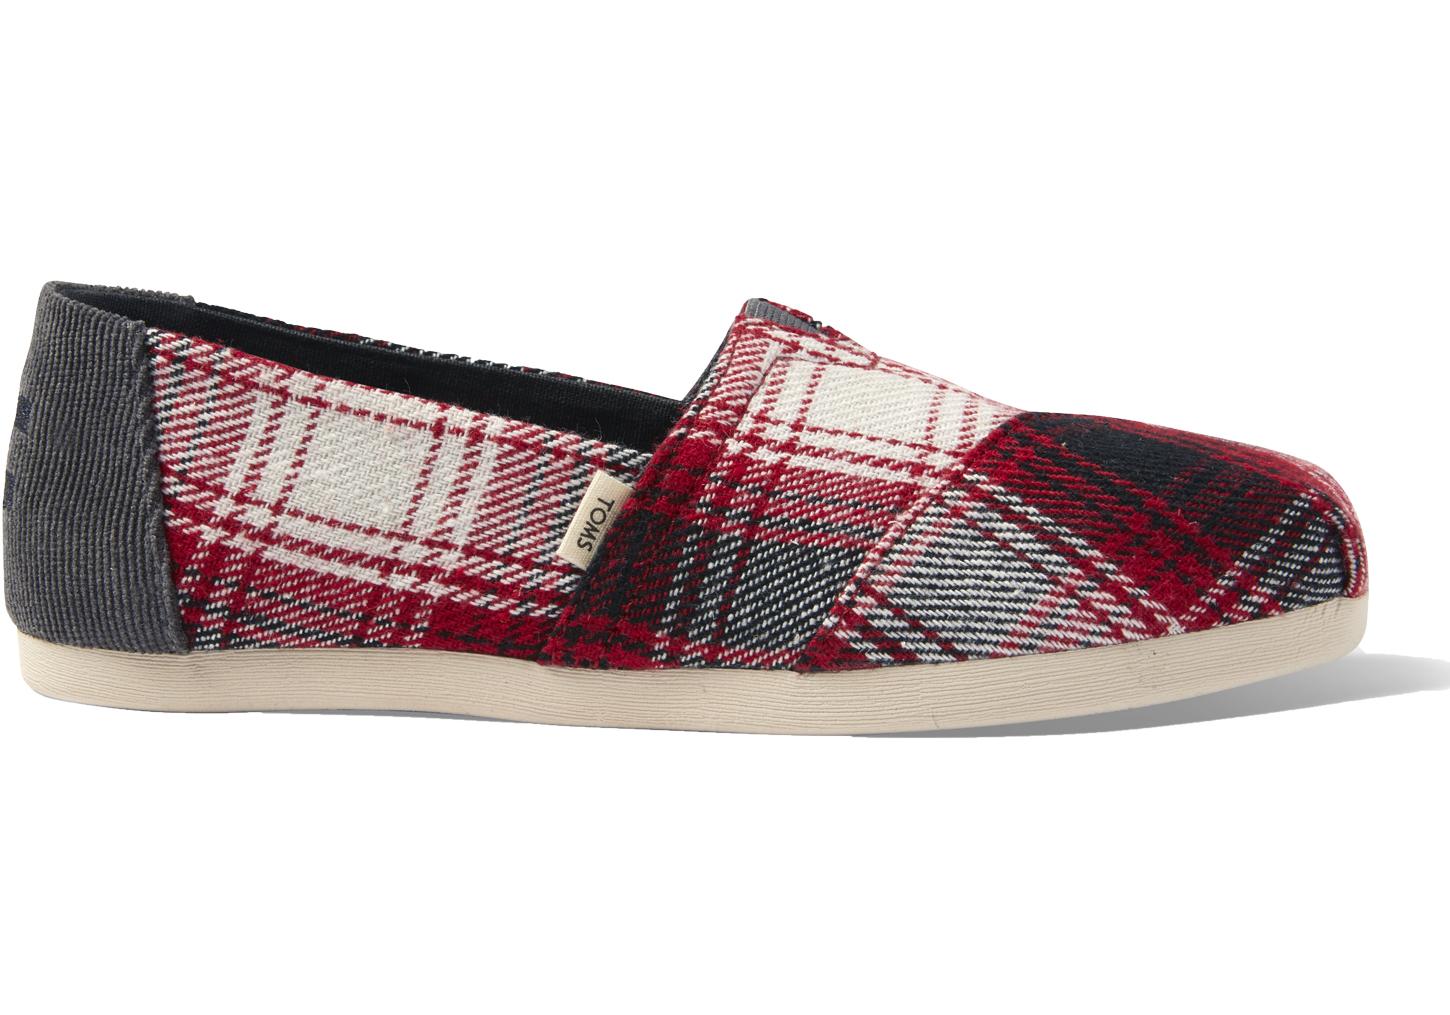 toms red plaid shoes